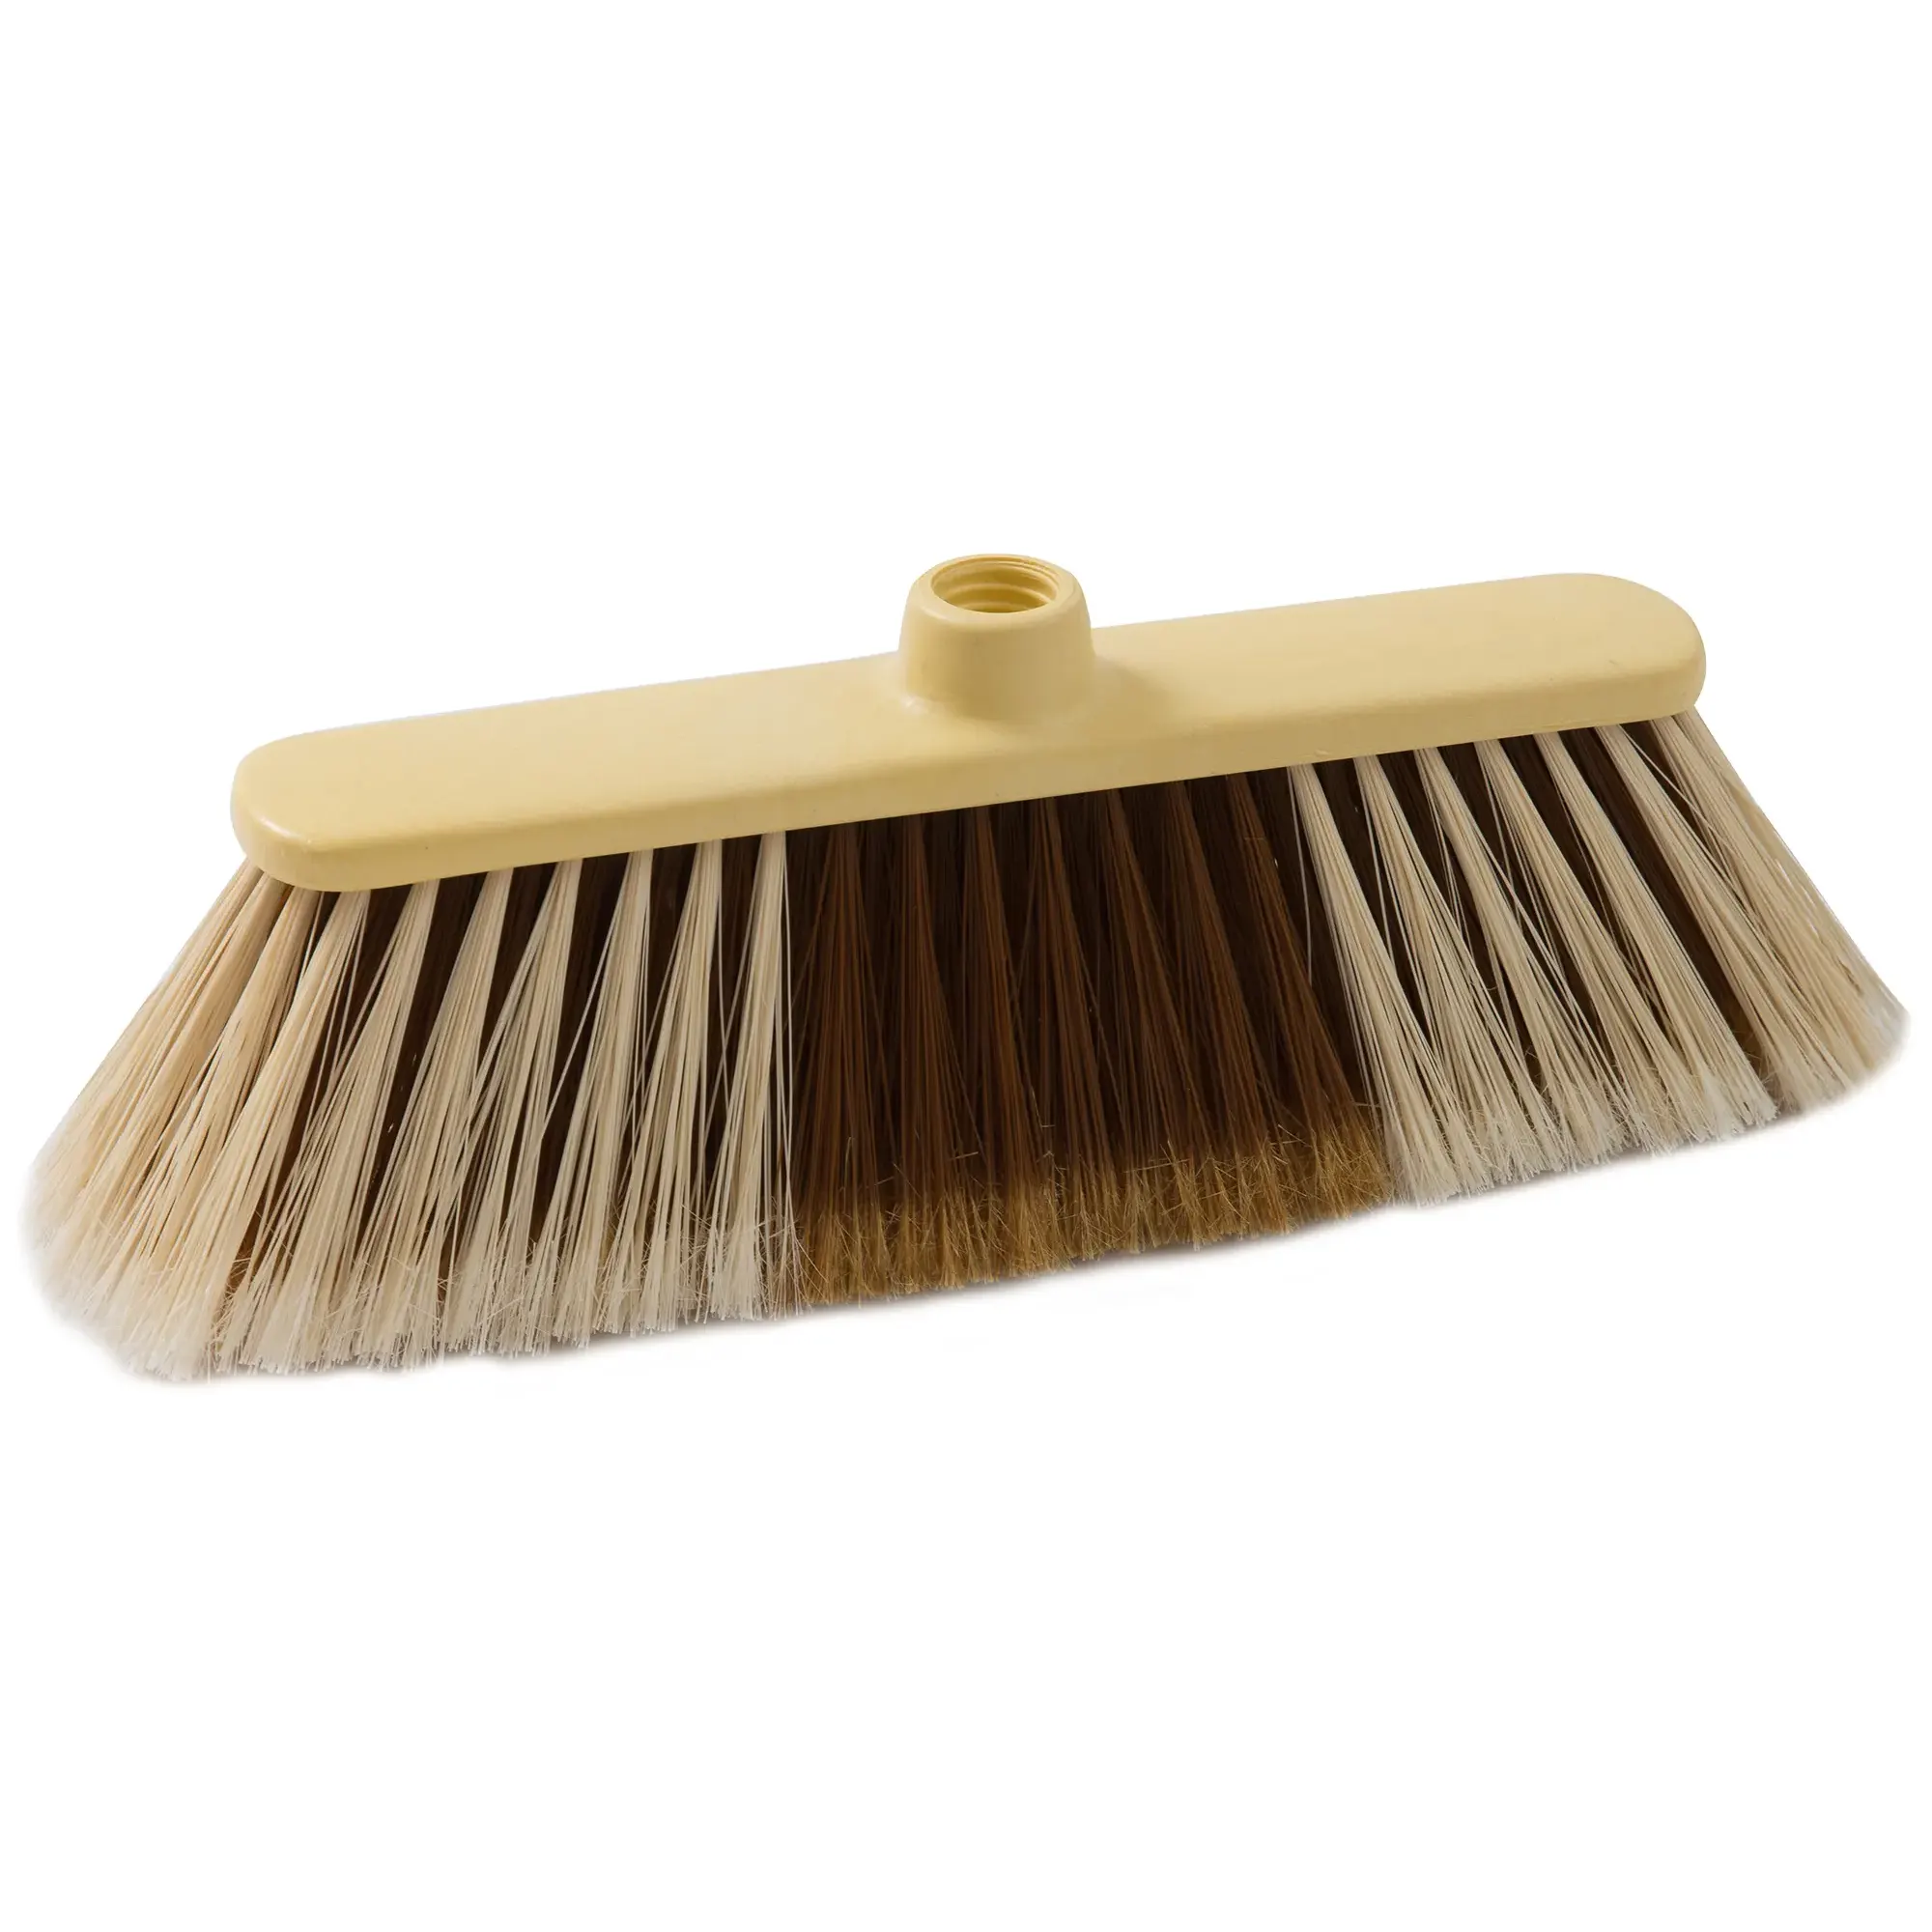 Luxor broom manufacture - Made in Italy cleaning items